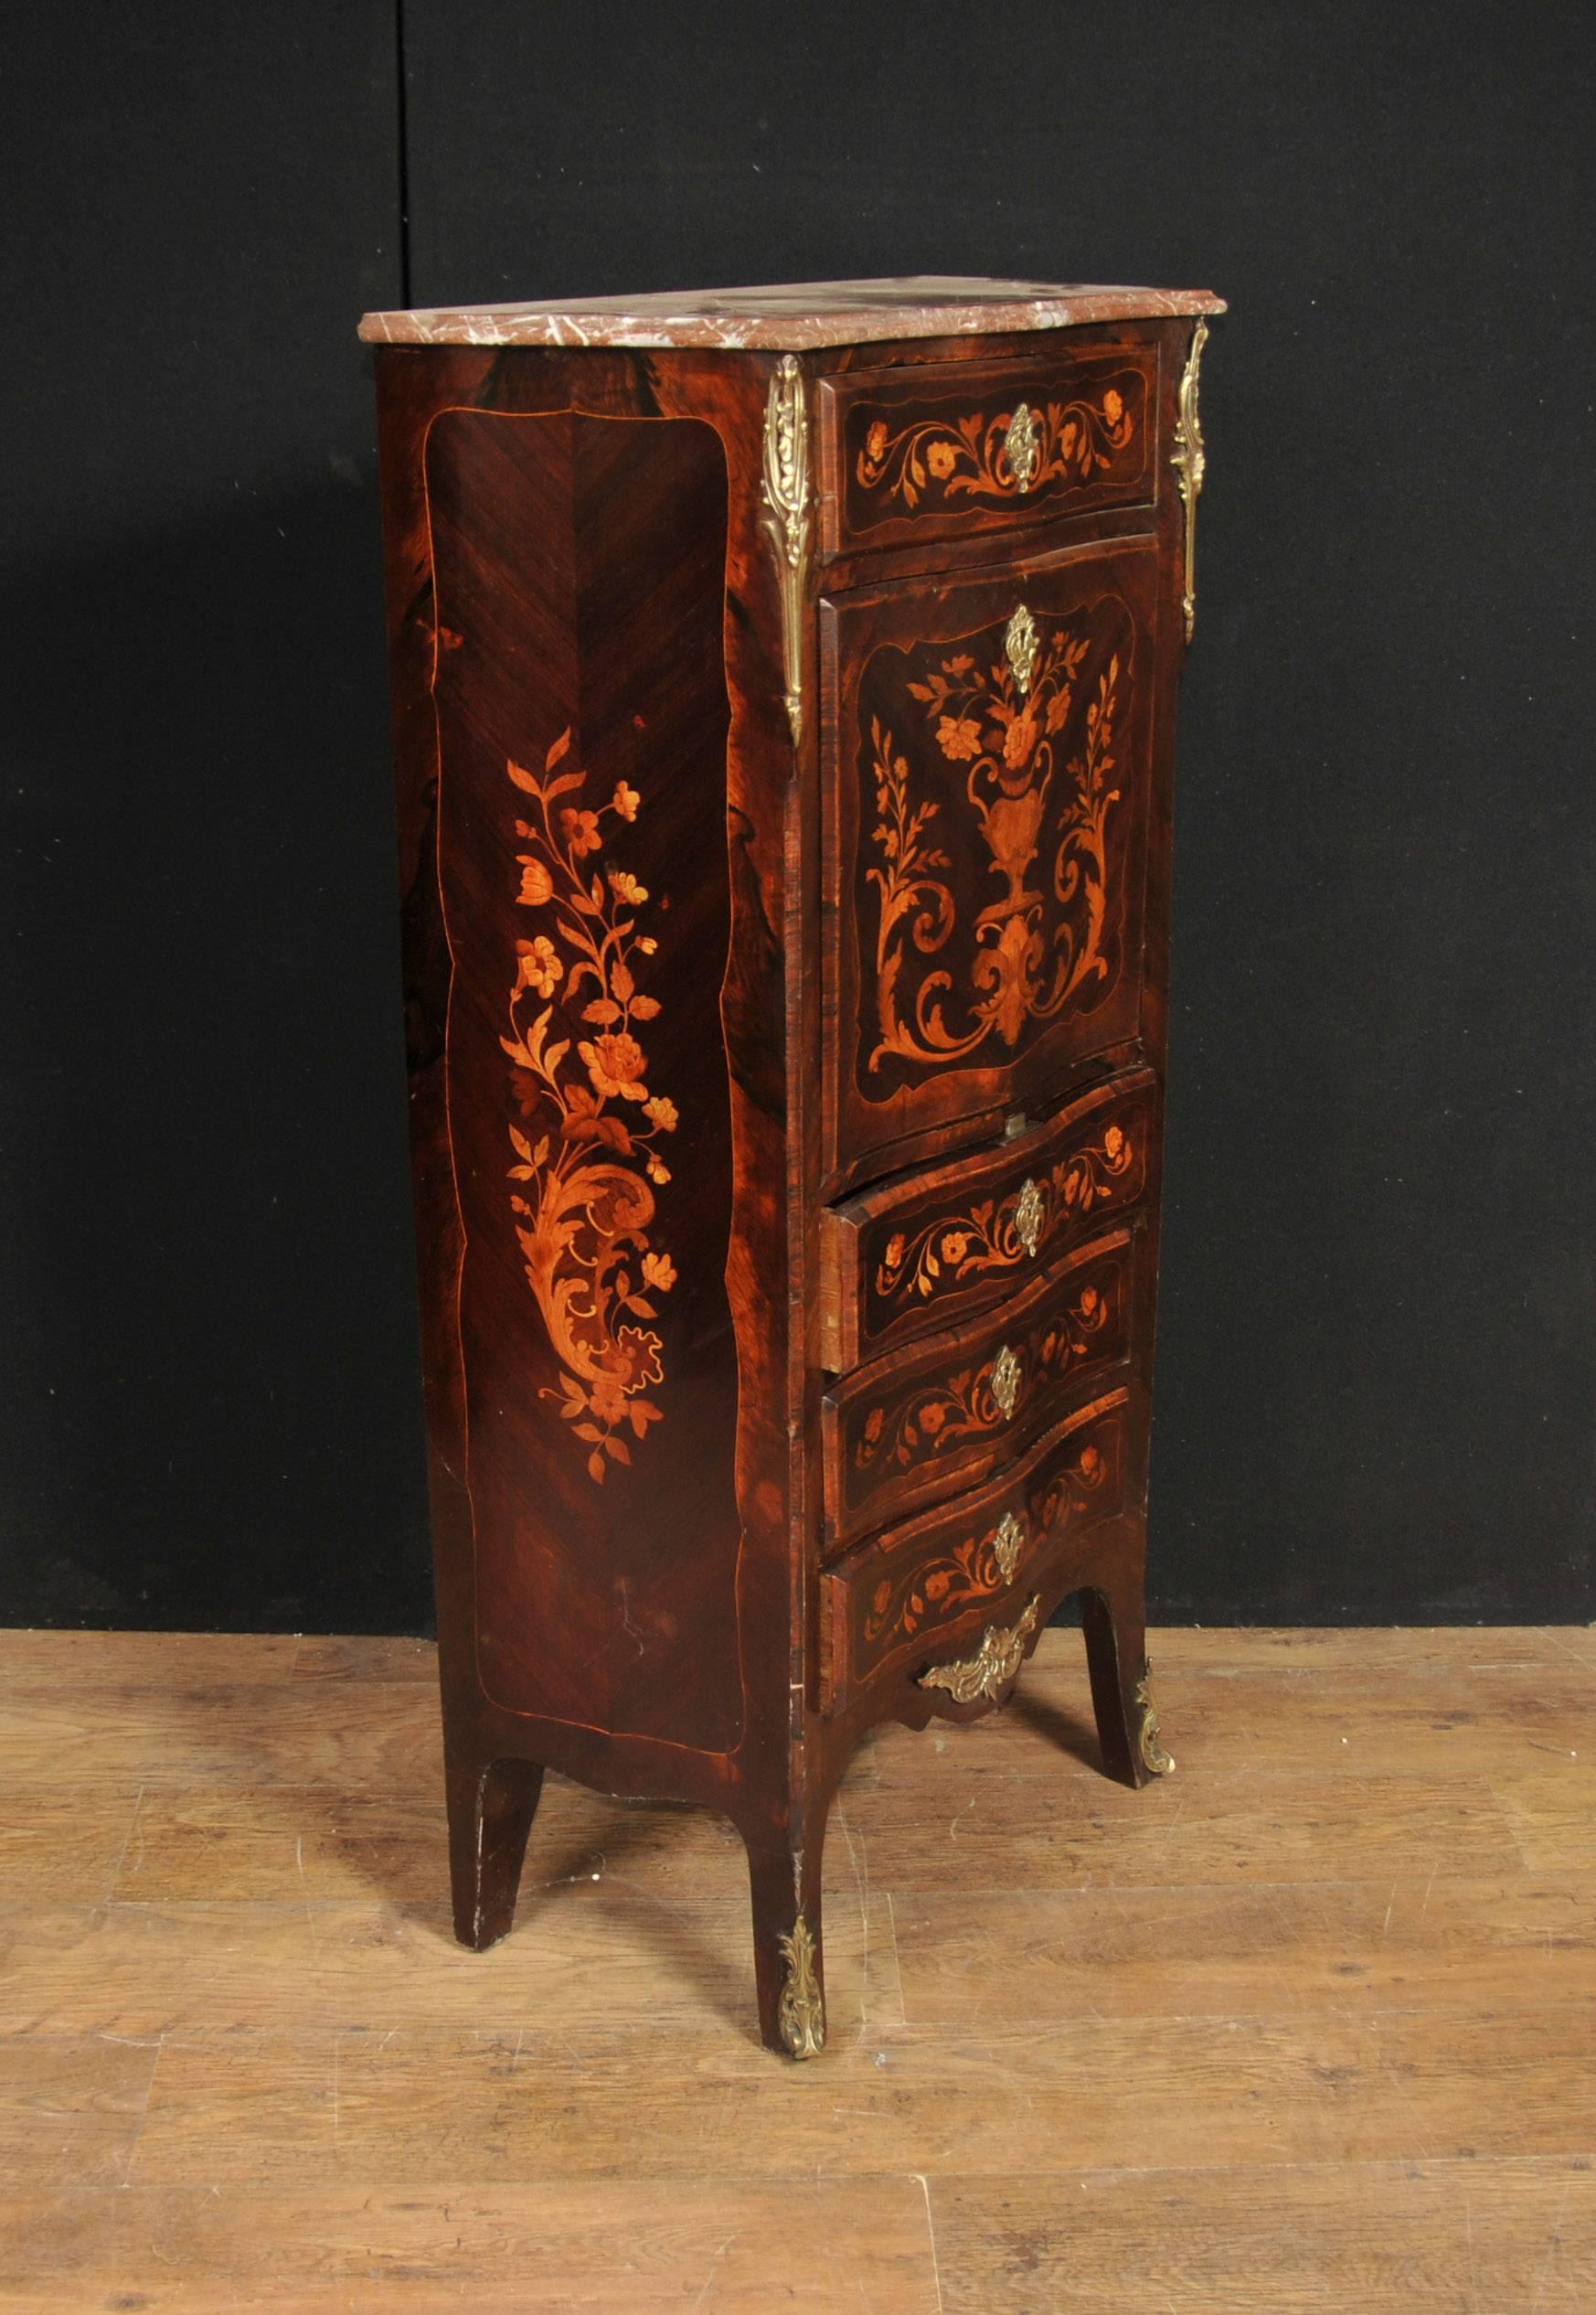 Antique French Empire Escritoire 1880 Desks Bureau Chest Marquetry Inlay In Good Condition For Sale In Potters Bar, Herts